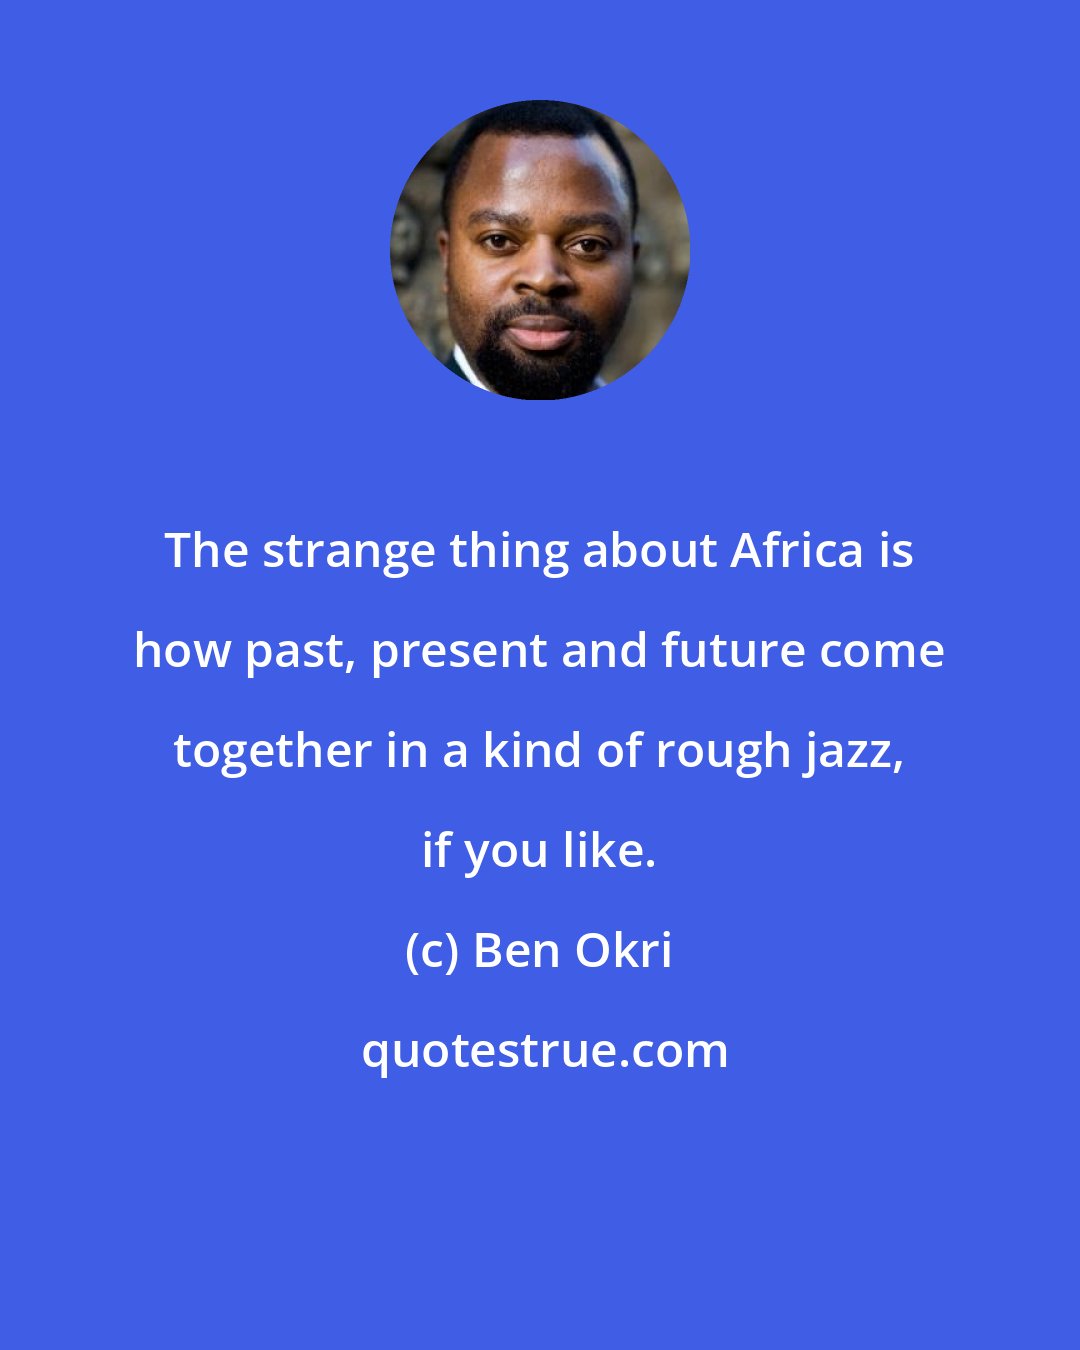 Ben Okri: The strange thing about Africa is how past, present and future come together in a kind of rough jazz, if you like.